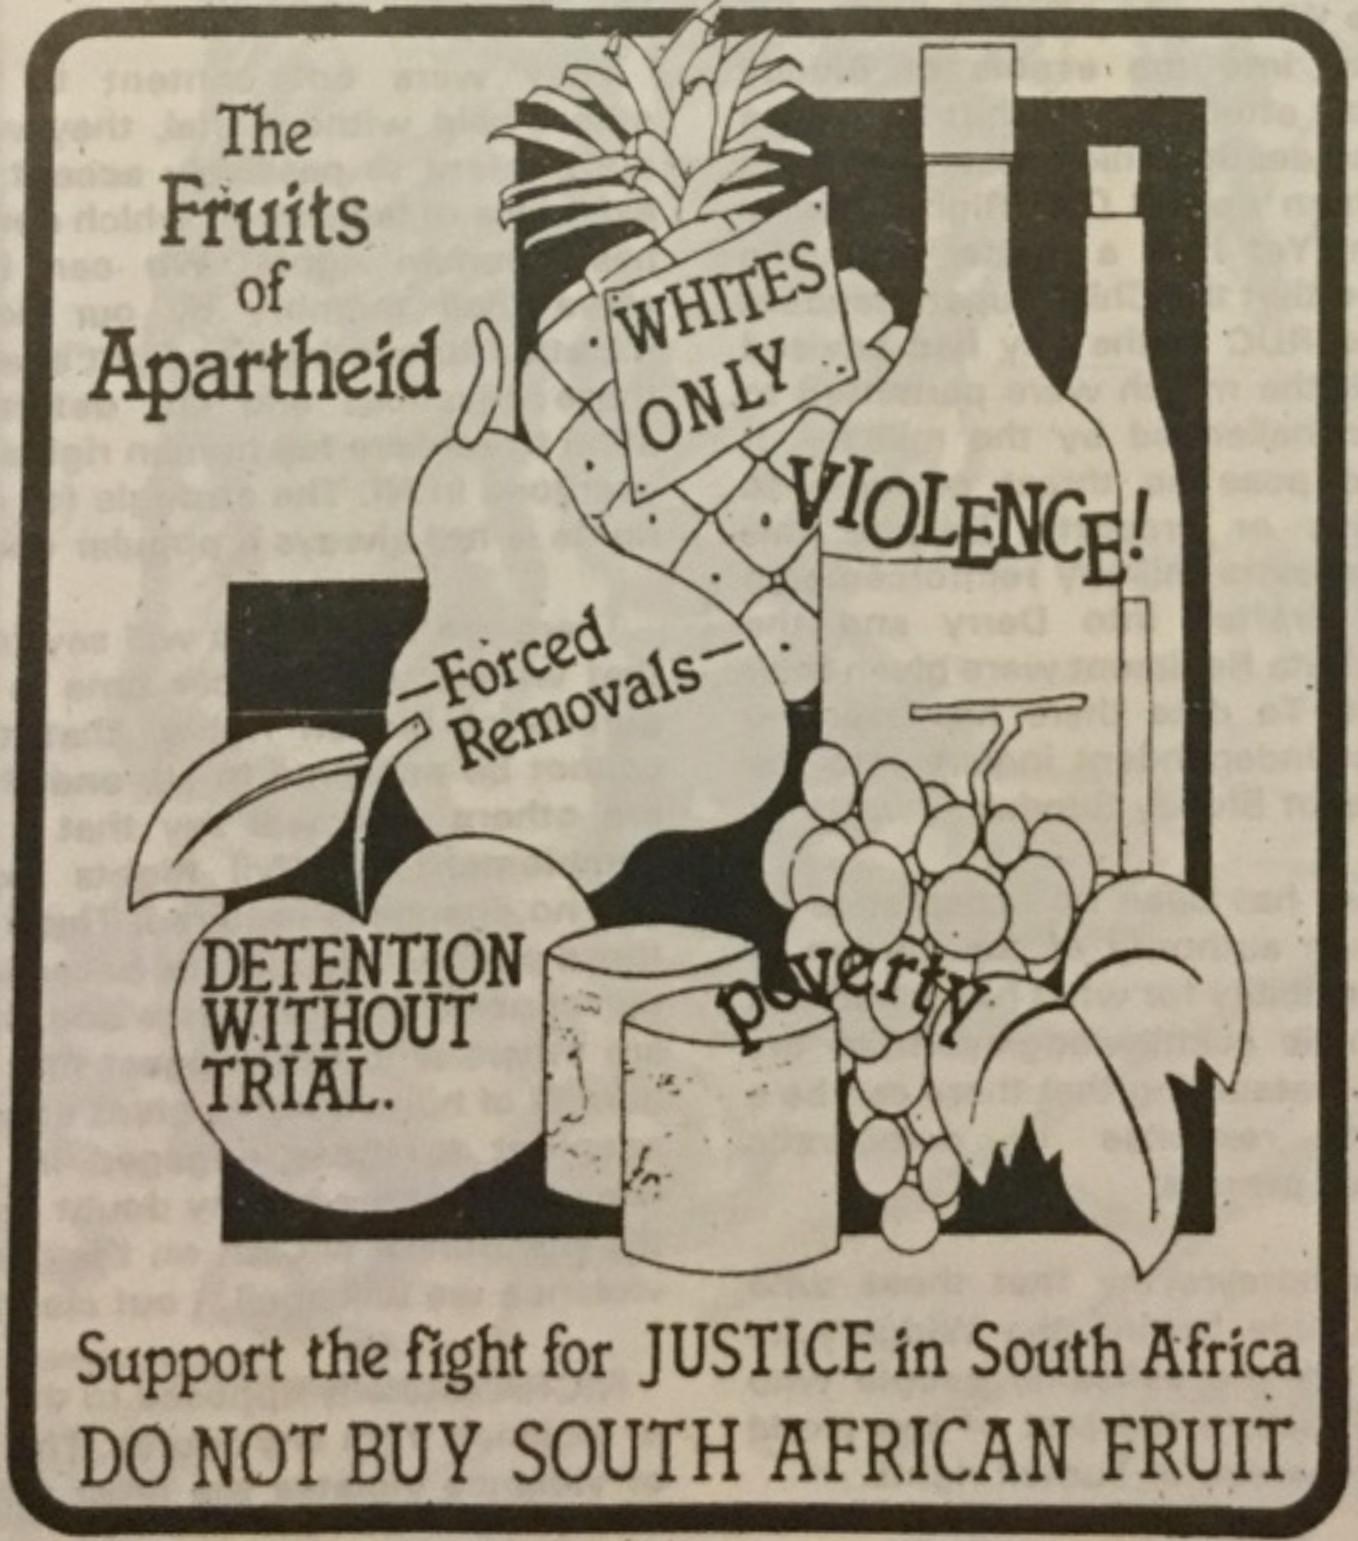 Call for boycott of fruit from South Africa, from the Workers Party's Ireland magazine, 1983.